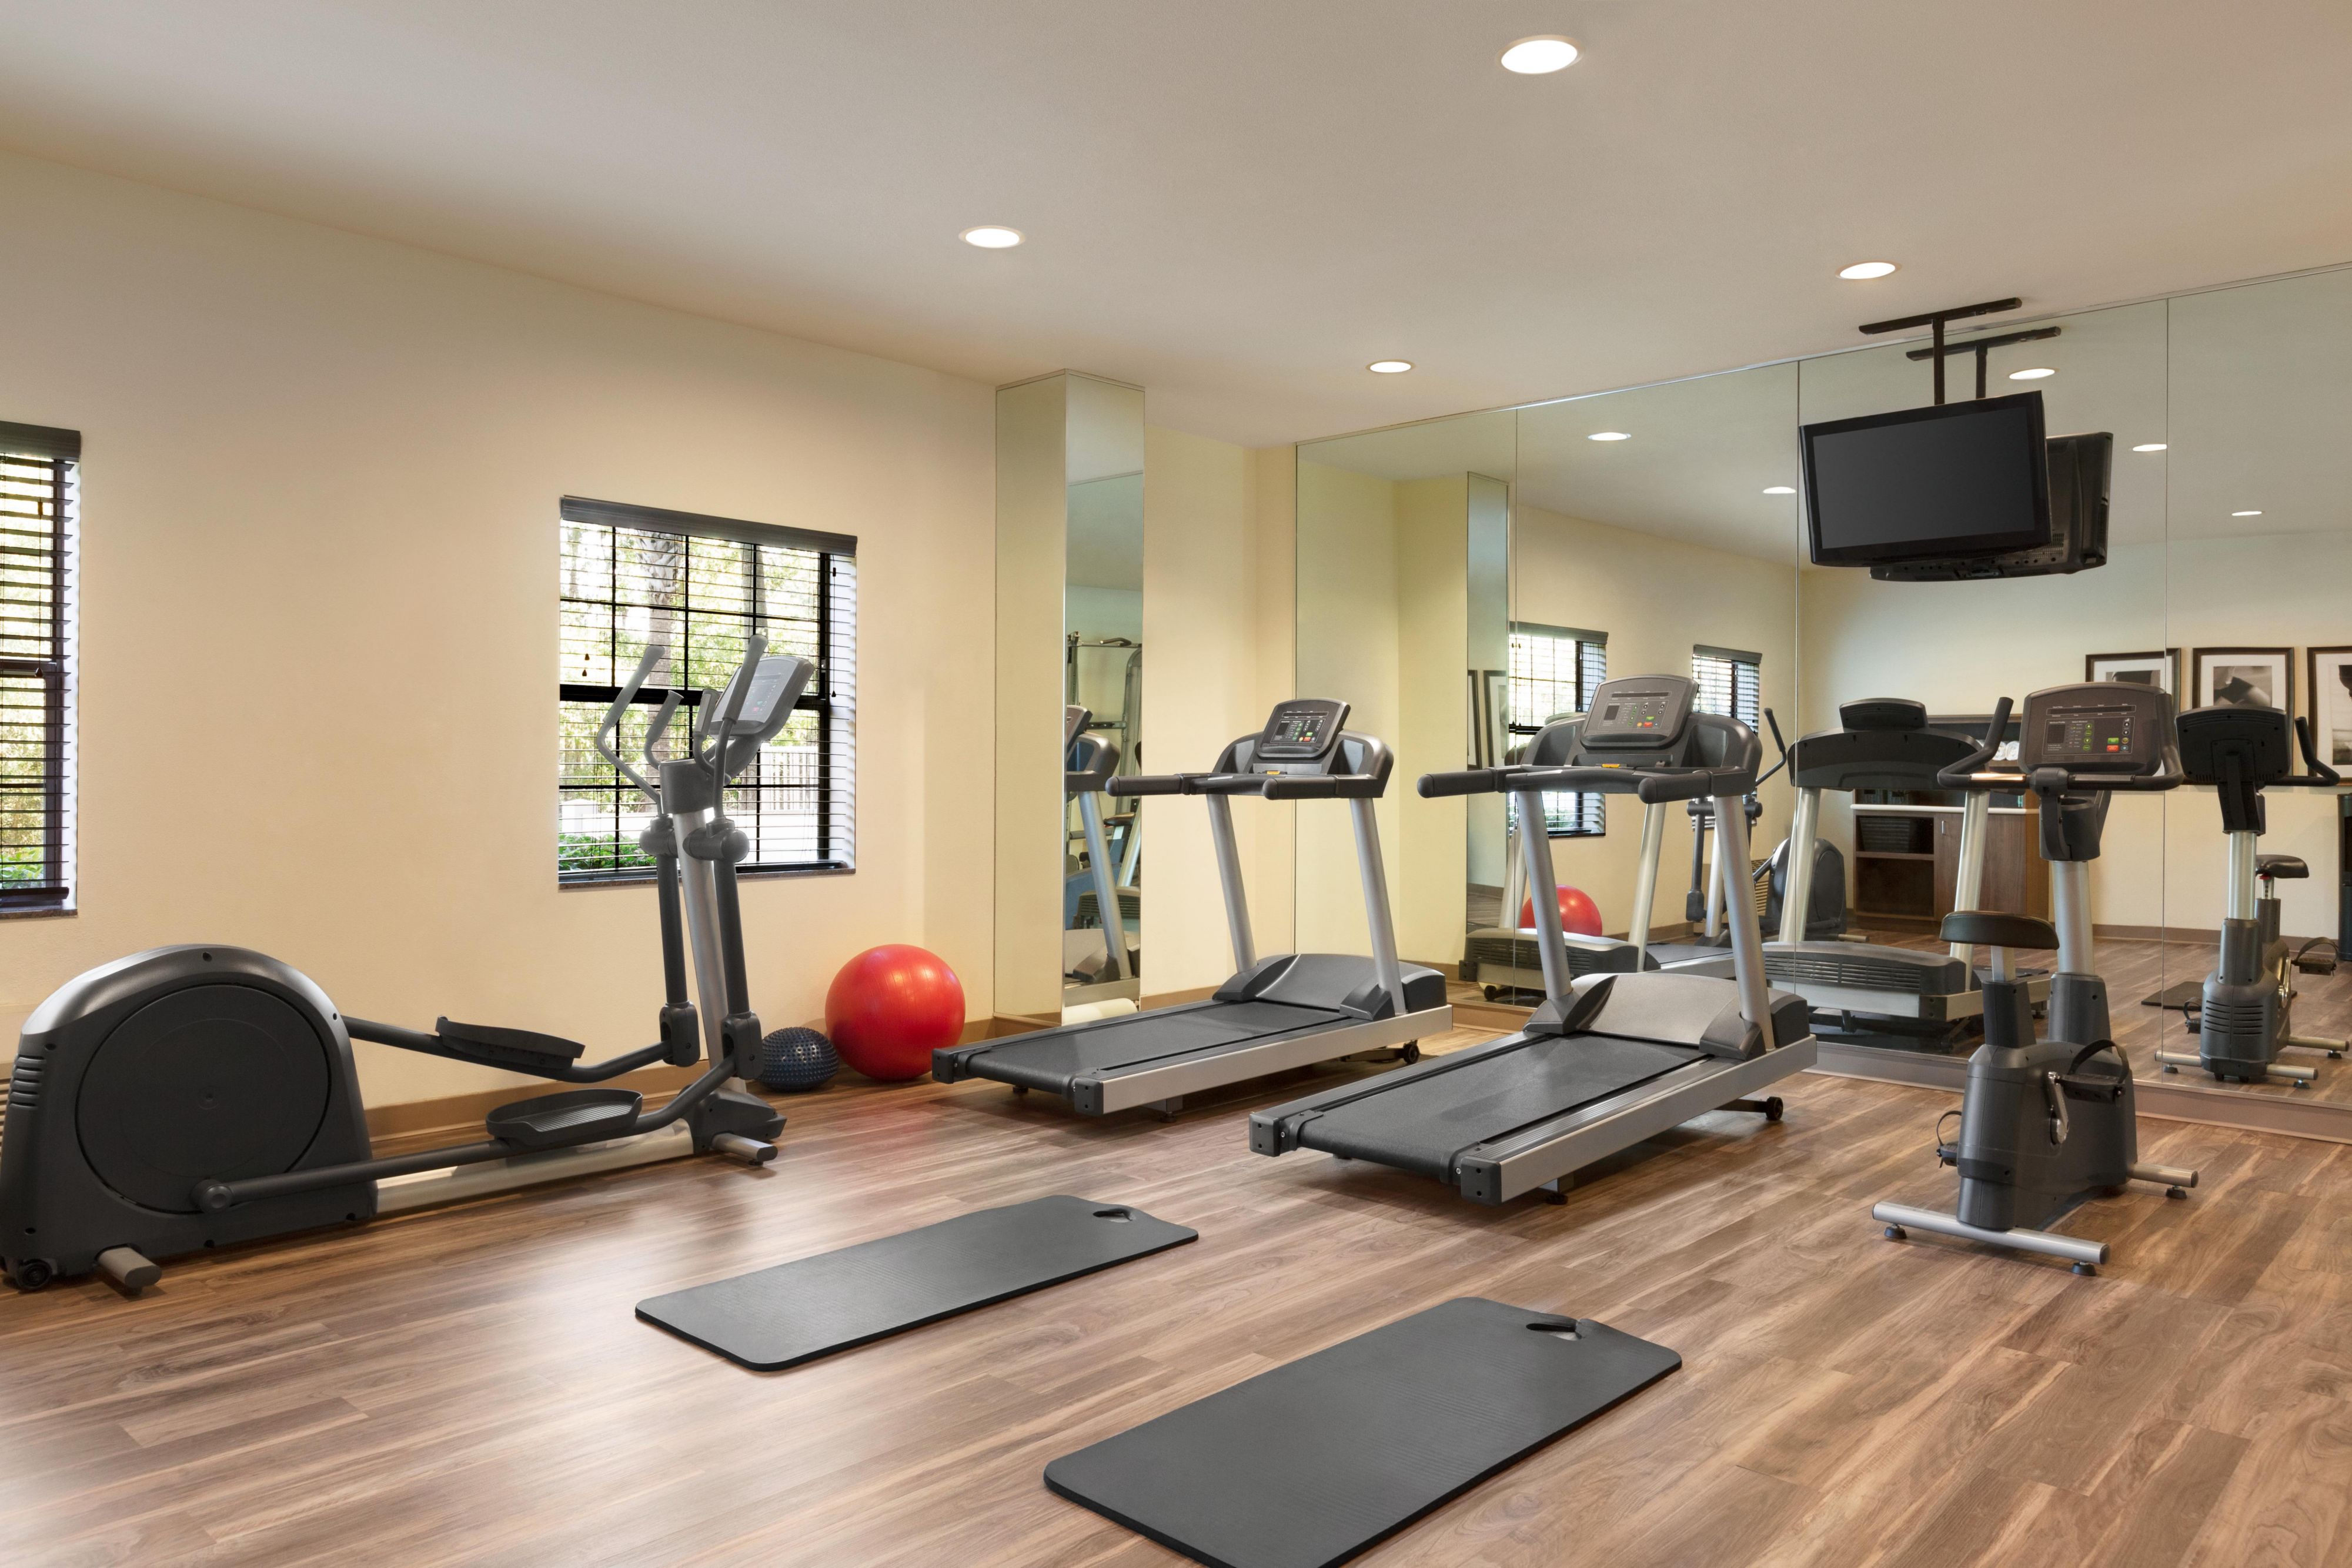 Break a sweat at our 24-hour fitness center with treadmills, ellipticals, weight bench, free weights, and exercise bikes. Complimentary towel service, water, and earbuds are offered for your workout.